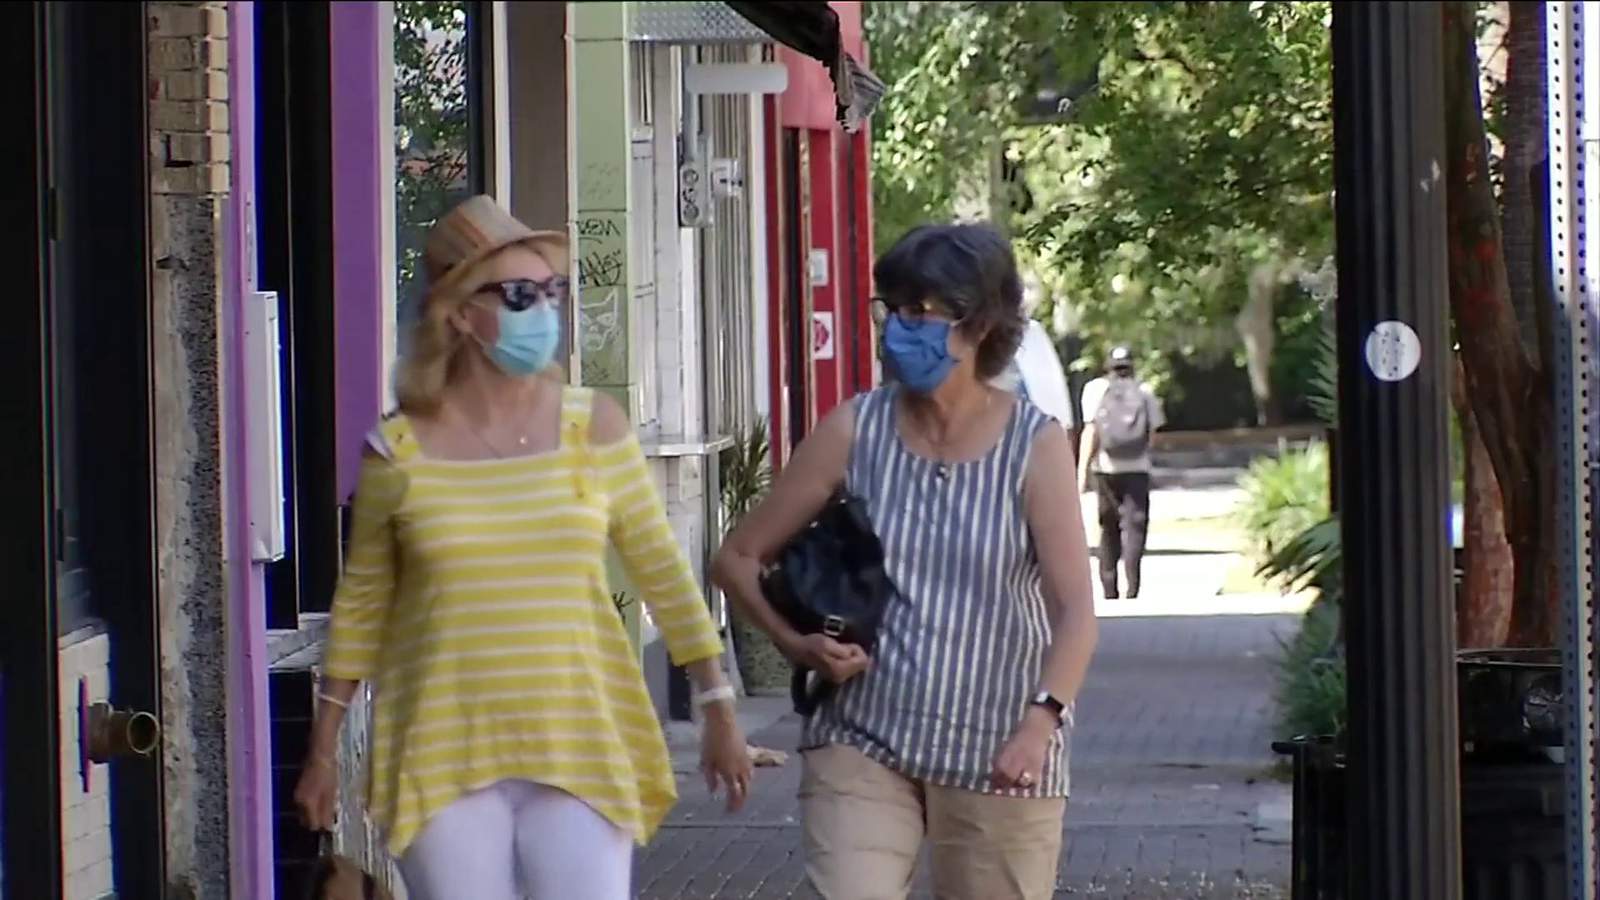 Indialantic adopts emergency order requiring face masks to curb spread of COVID-19